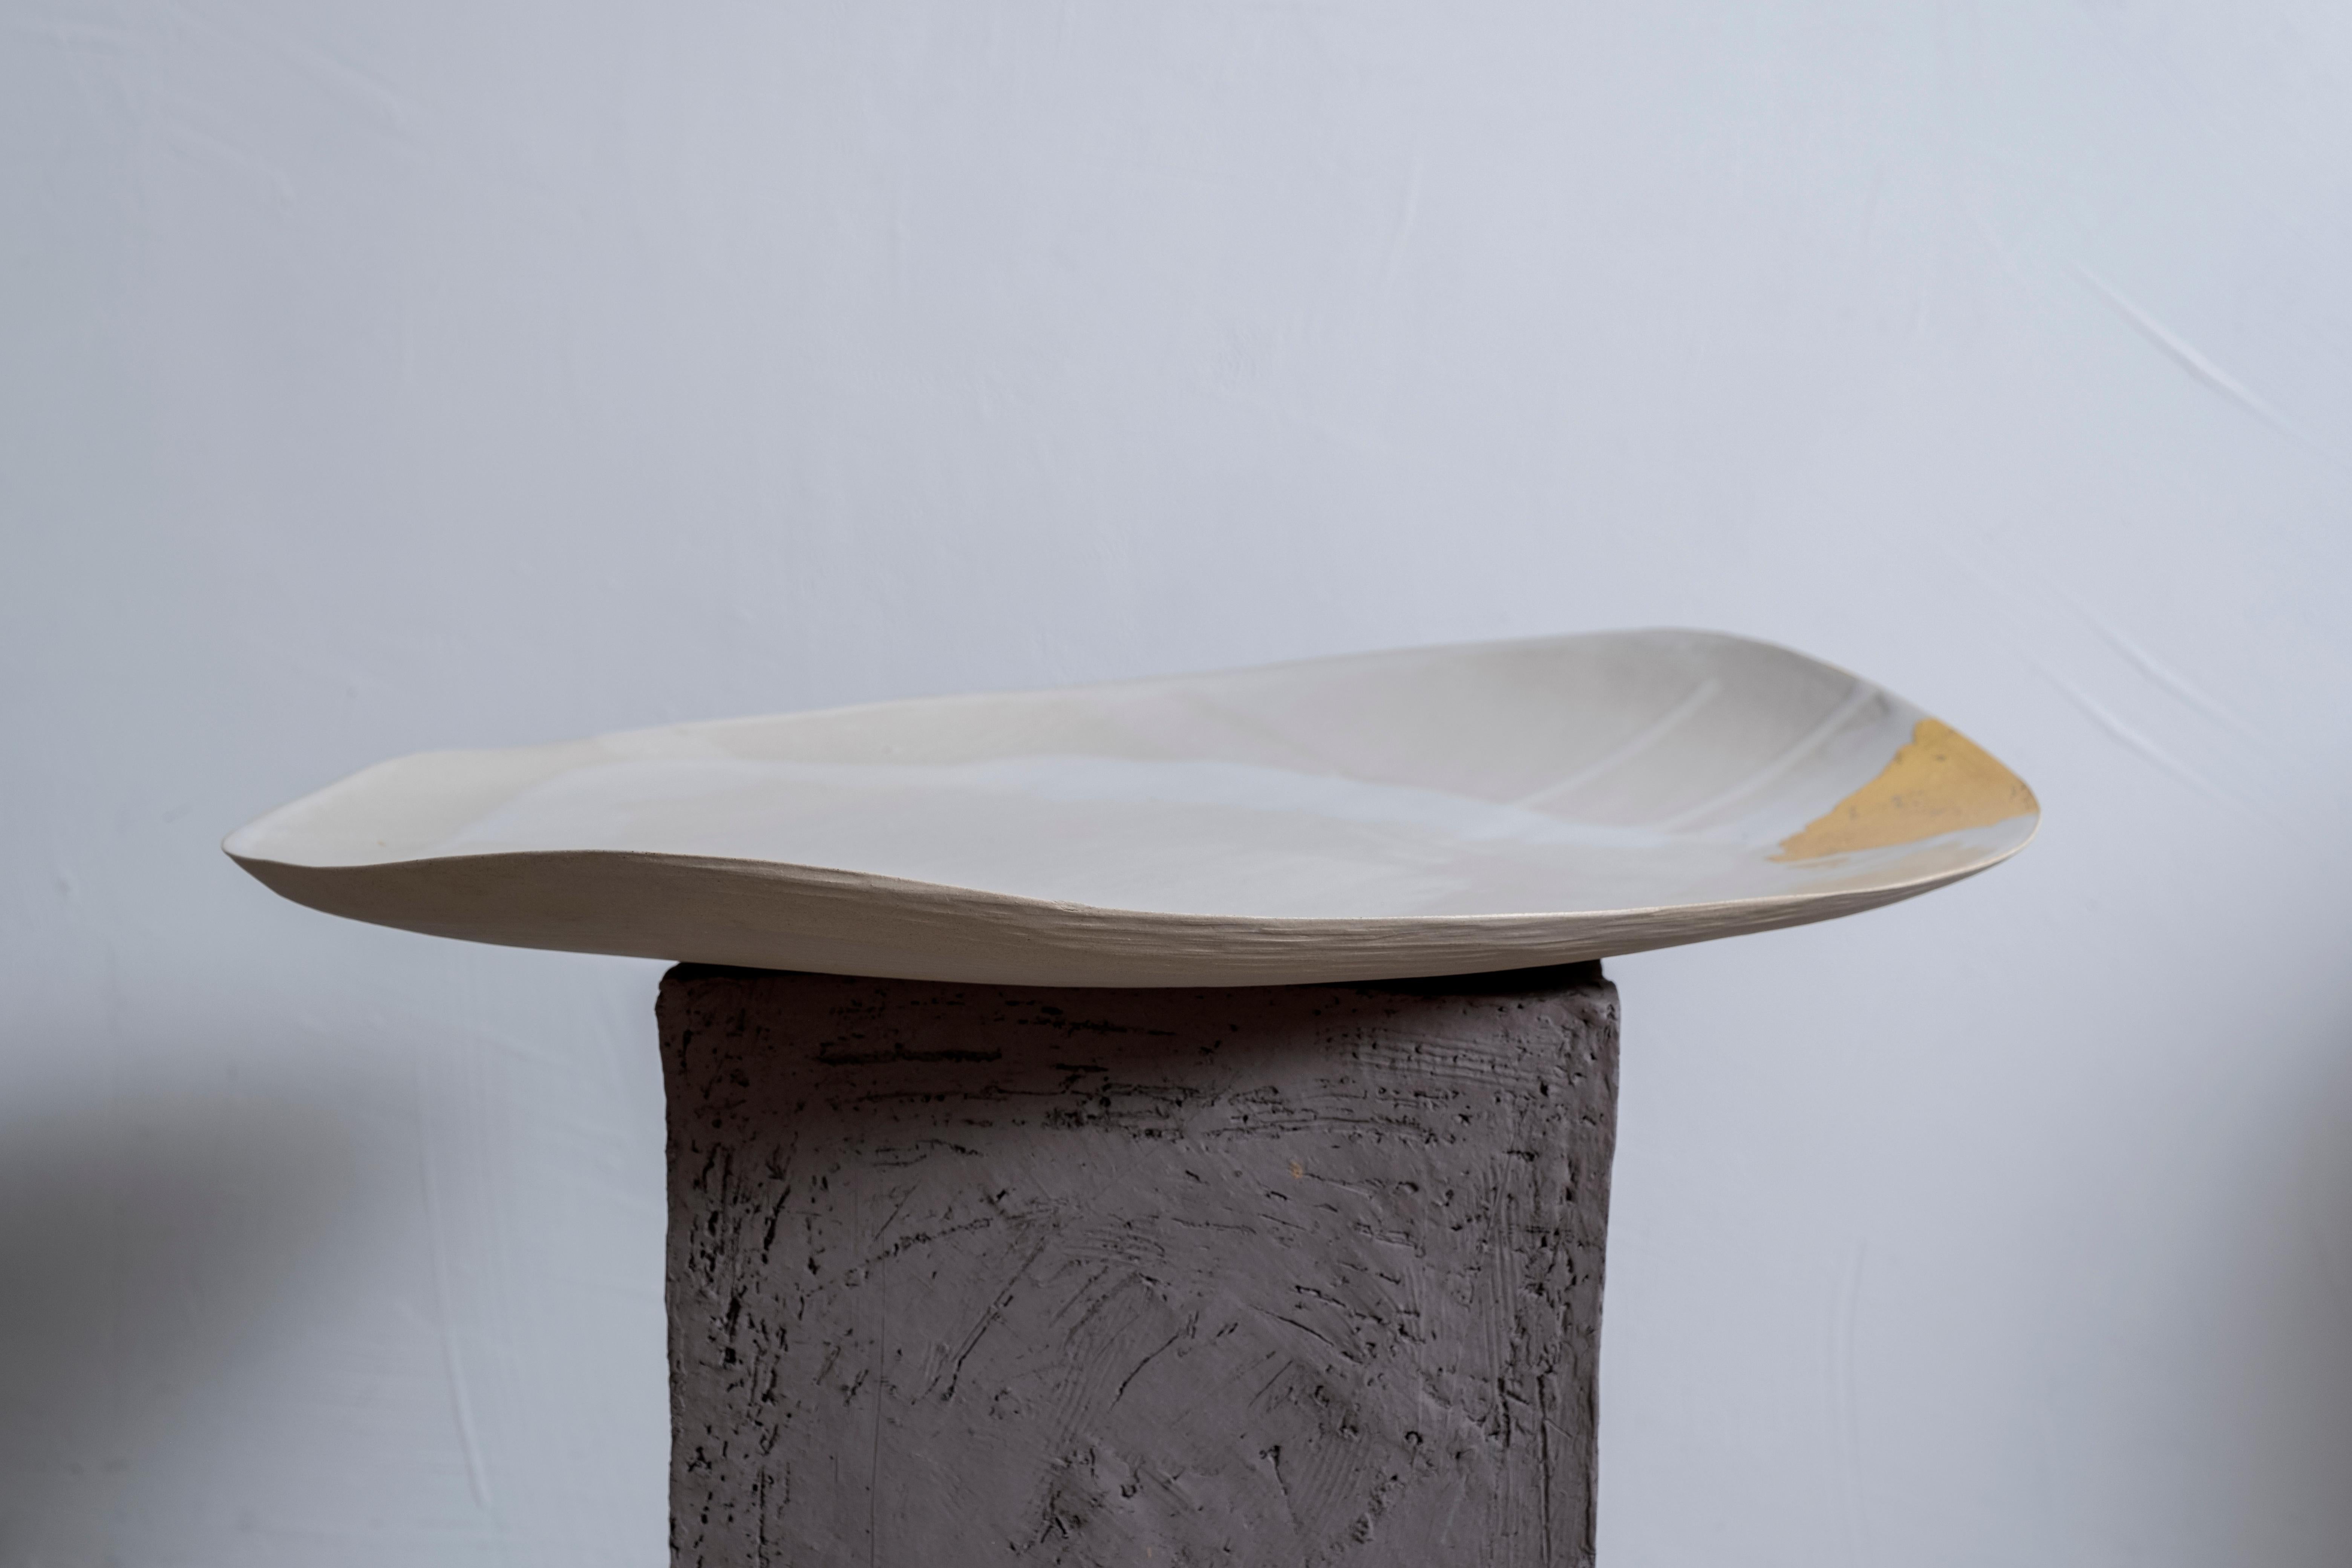 Dune #9 sculpture by Margaux Leycuras
One of a Kind, Signed and numbered
Dimensions: D 38 x H 45 cm.
Material: Sandy stoneware platter with white glaze and 22 Carat gold leaf.

The piece is signed, numbered and delivered with a certificate of